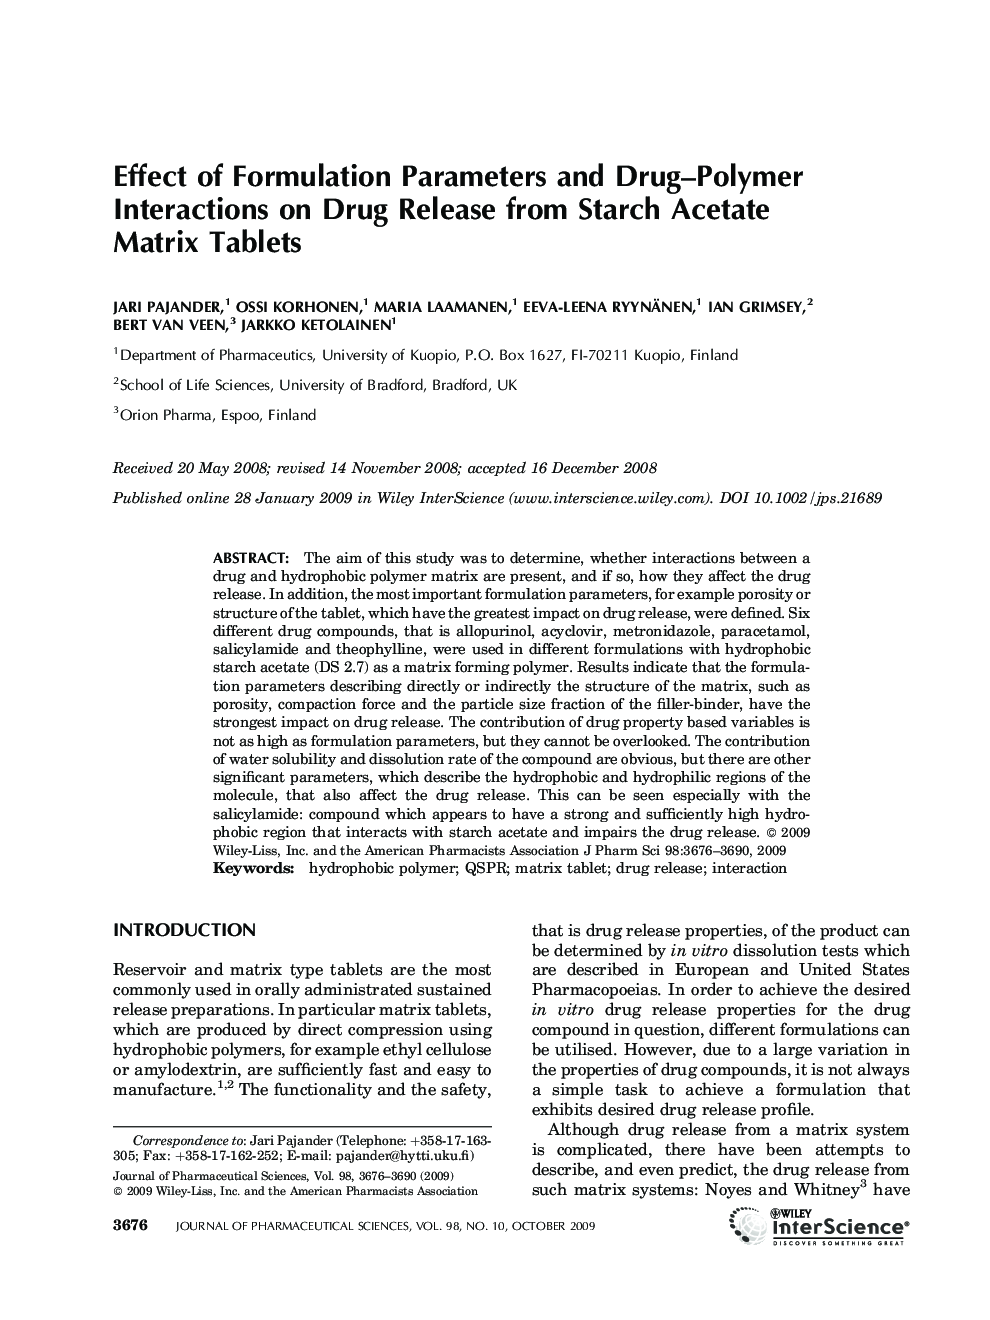 Effect of formulation parameters and drug-polymer interactions on drug release from starch acetate matrix tablets